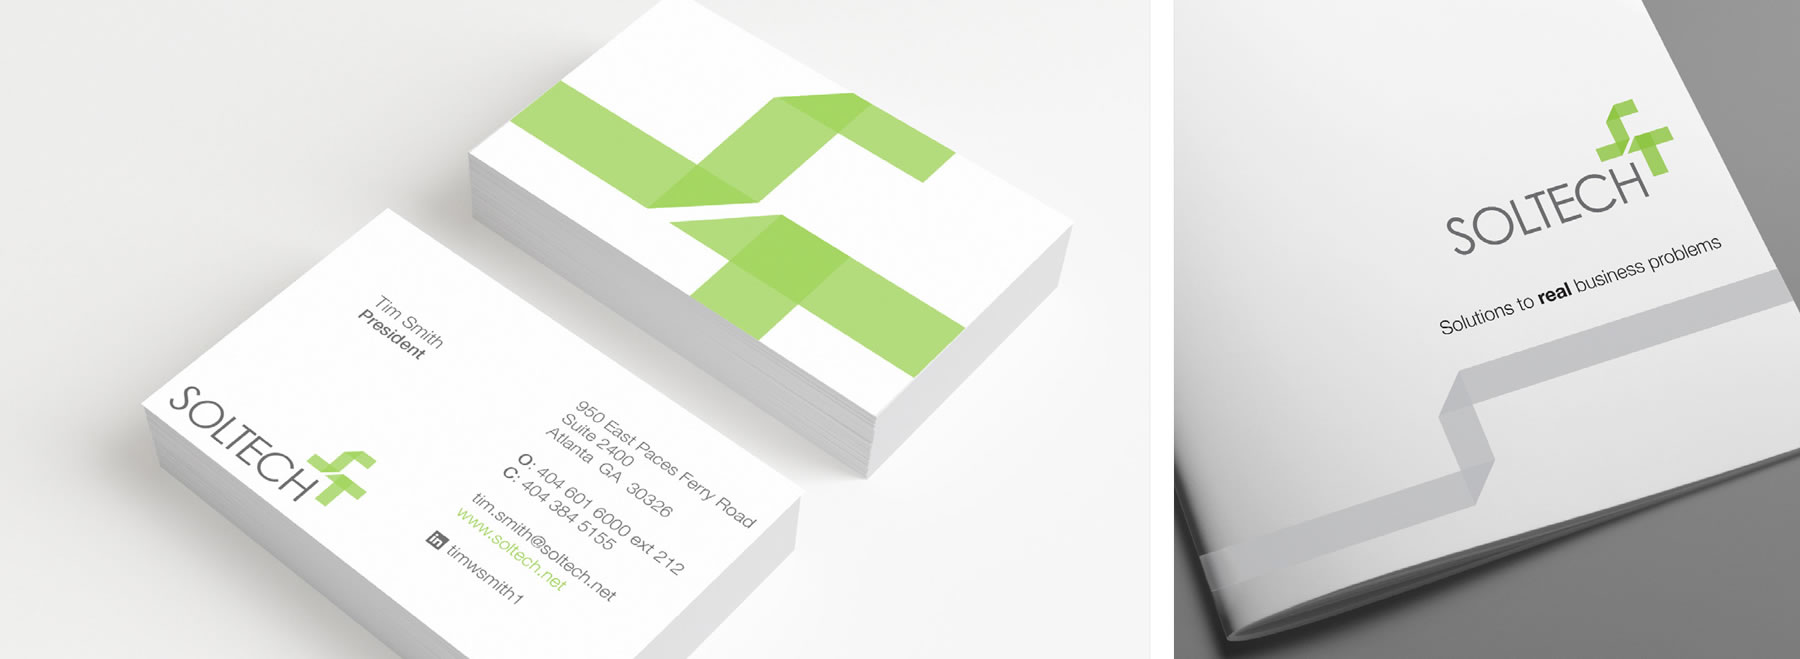 SolTech Business Cards and Letterhead